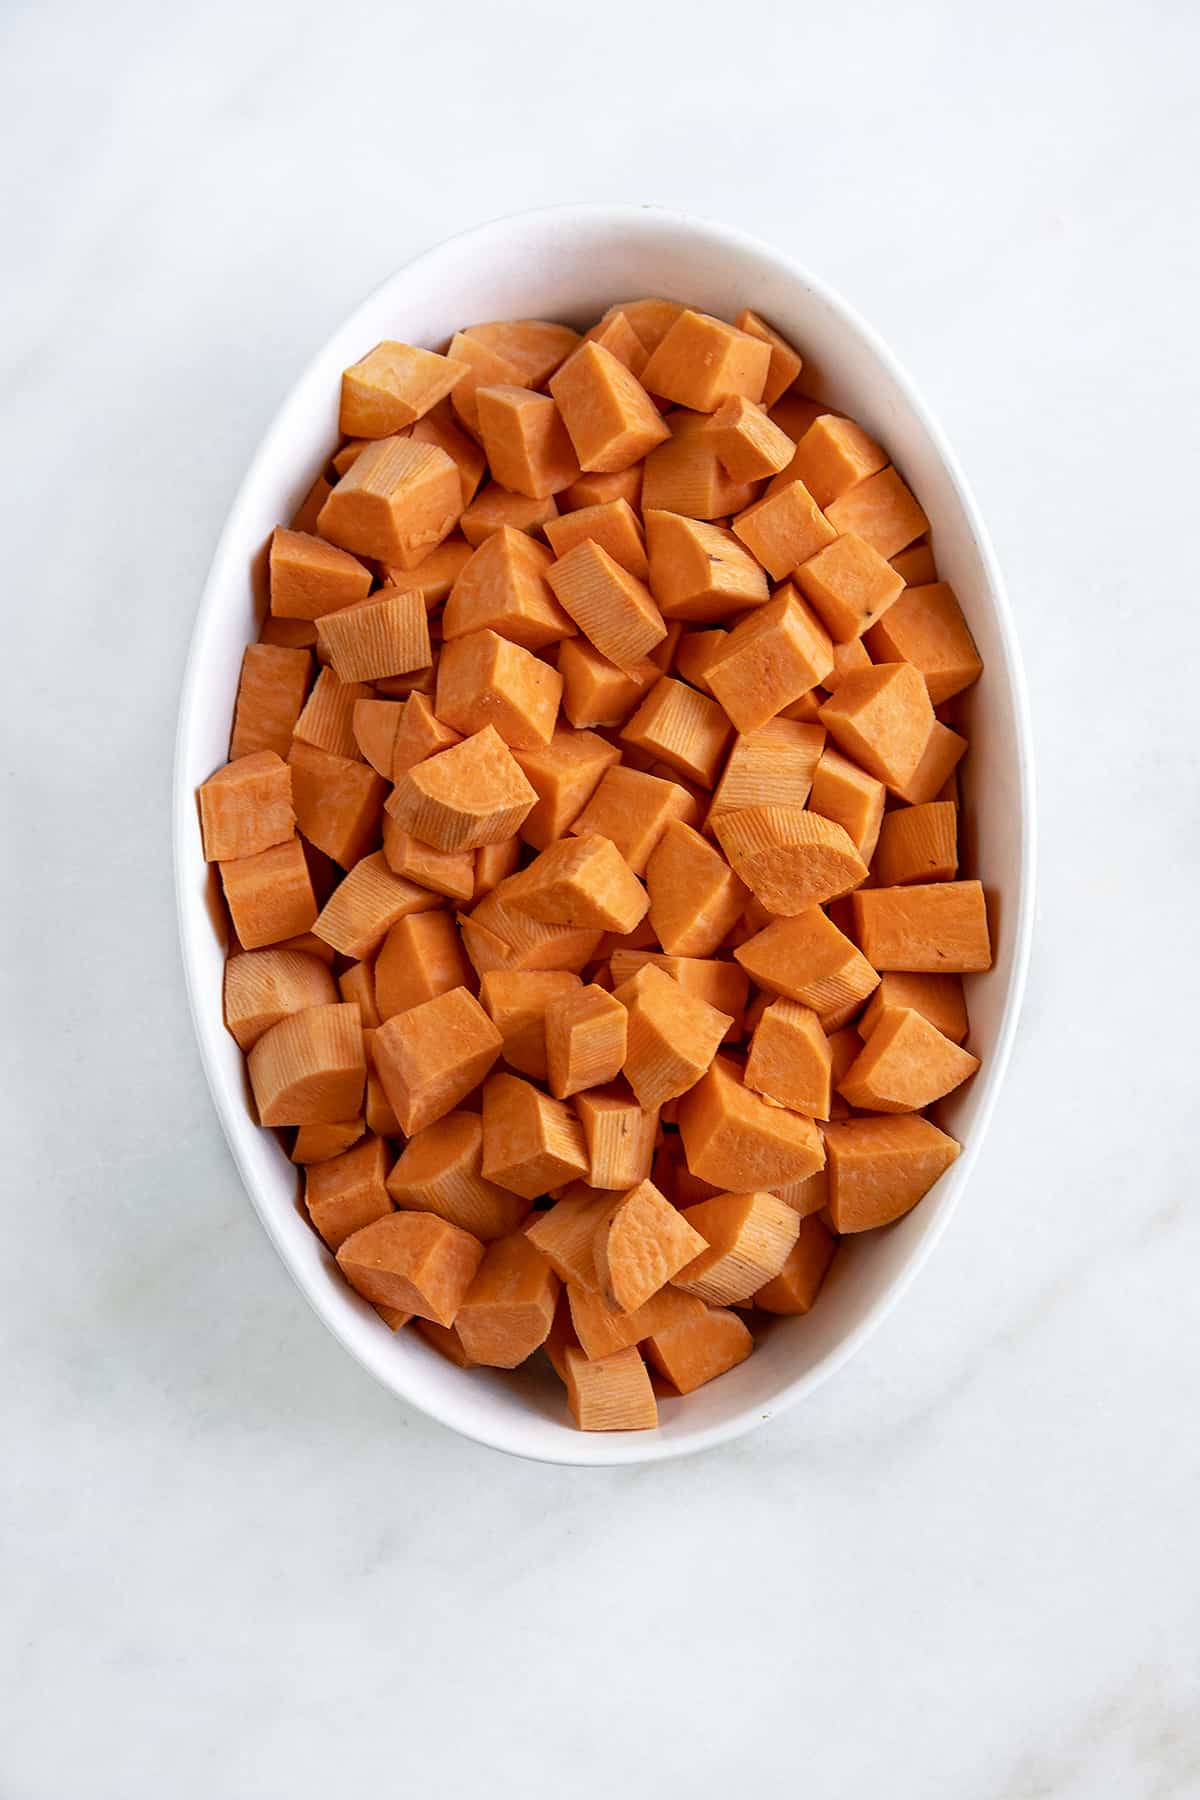 Cubed uncooked yam in a white oval casserole, overhead shot. 